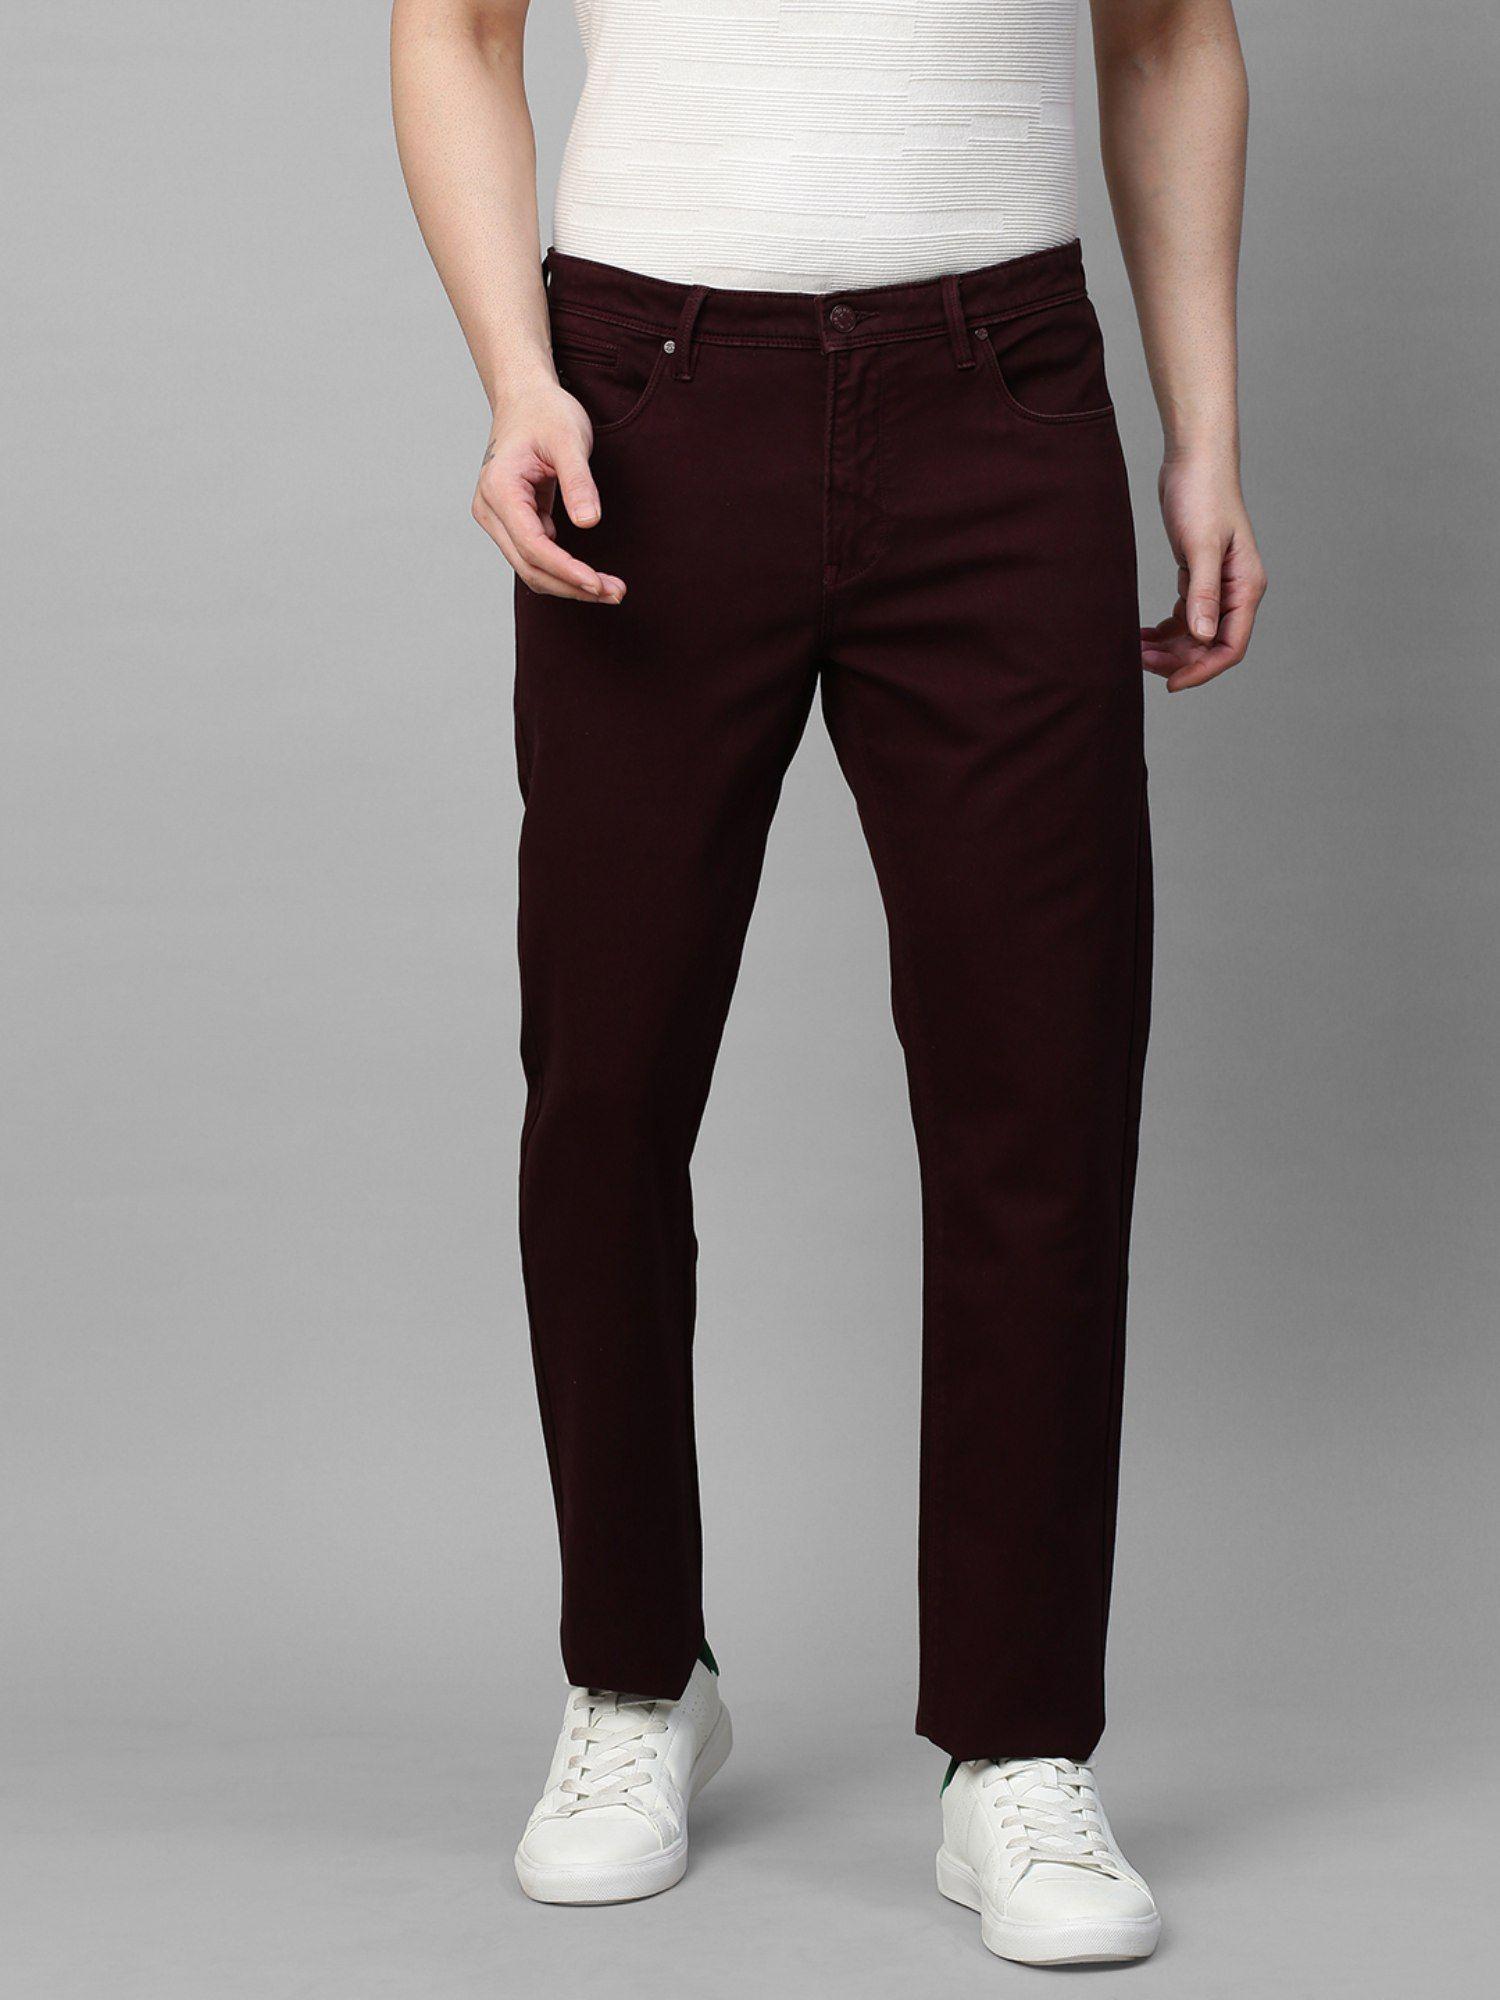 men's wine cotton stretch rico slim fit solid casual chinos